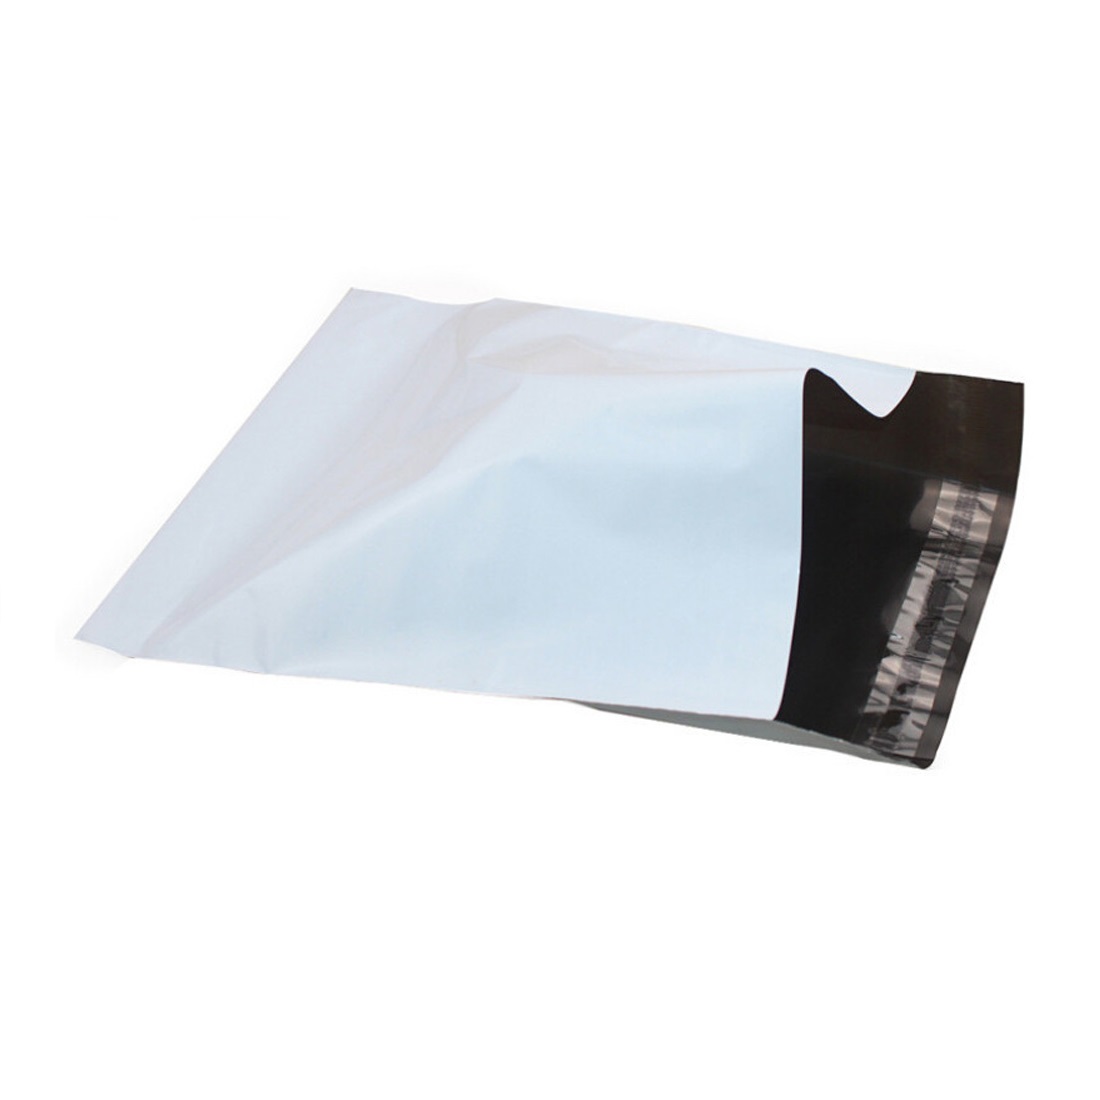 Courier Bags pcs Big Size Gray White Self Adhesive Plastic Poly Shipping Bag Express Envelope Mailing